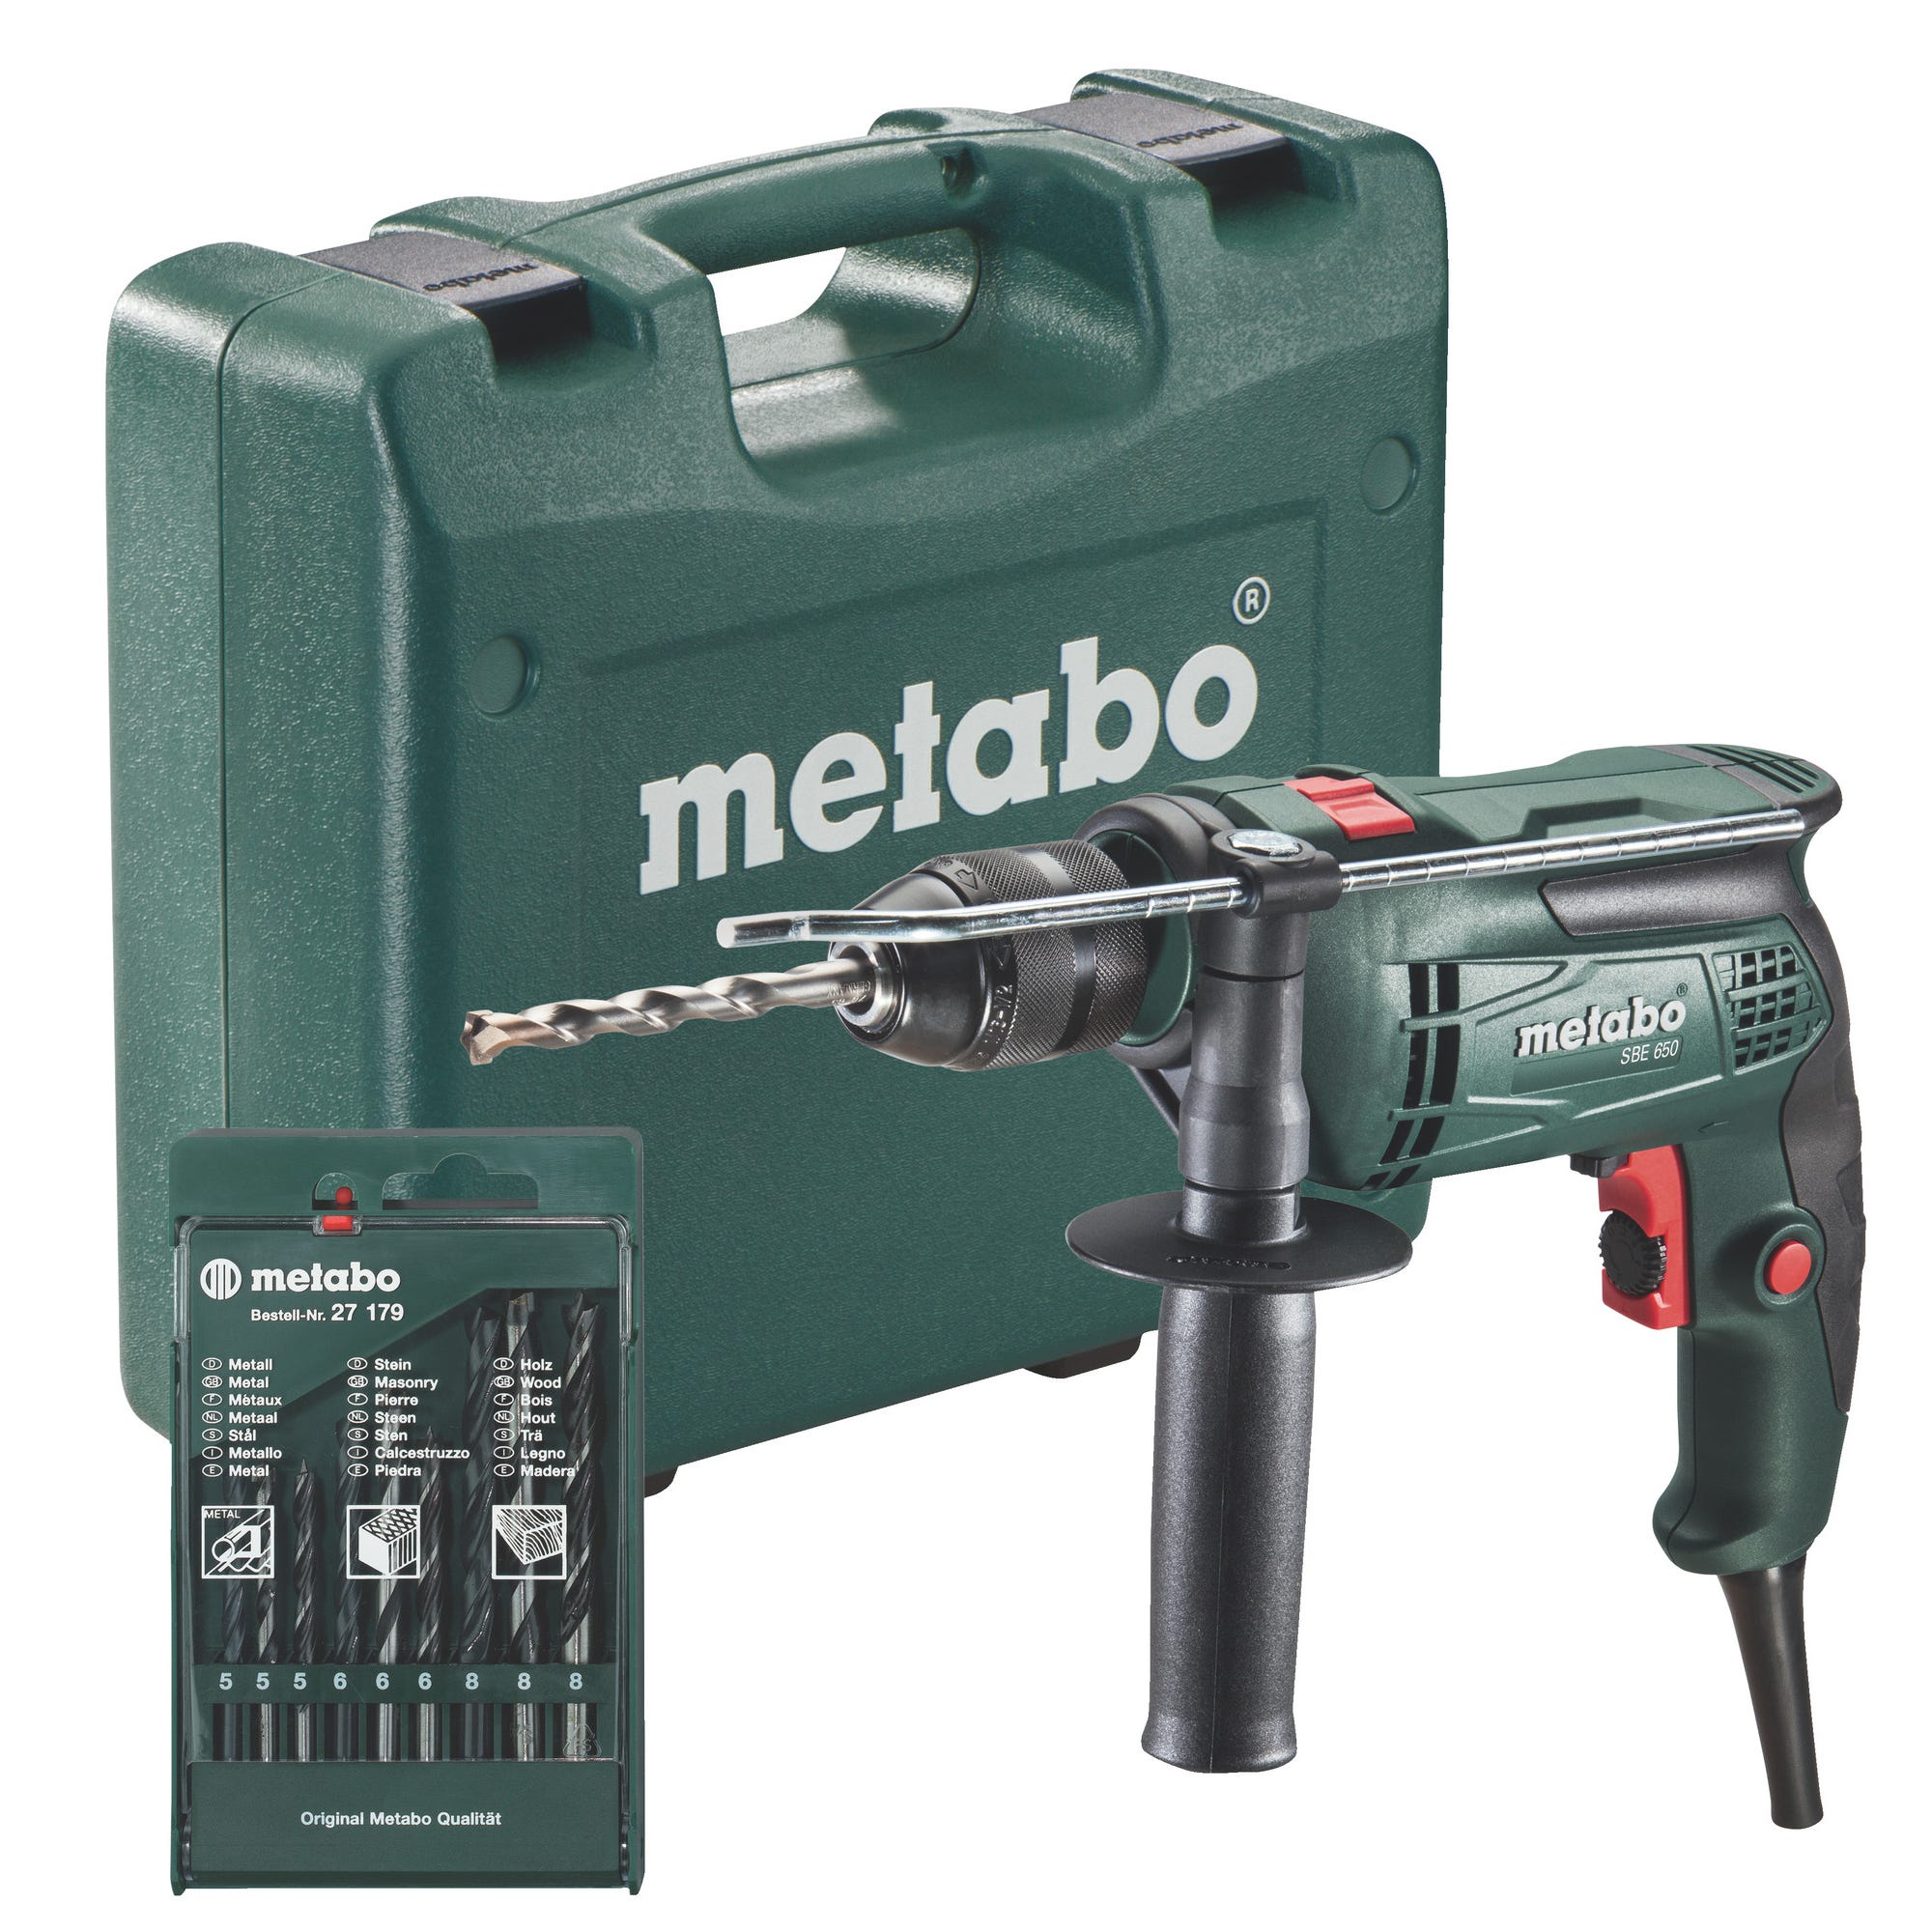 Perceuse à percussion filaire sbe650 + 13 forets - METABO 0